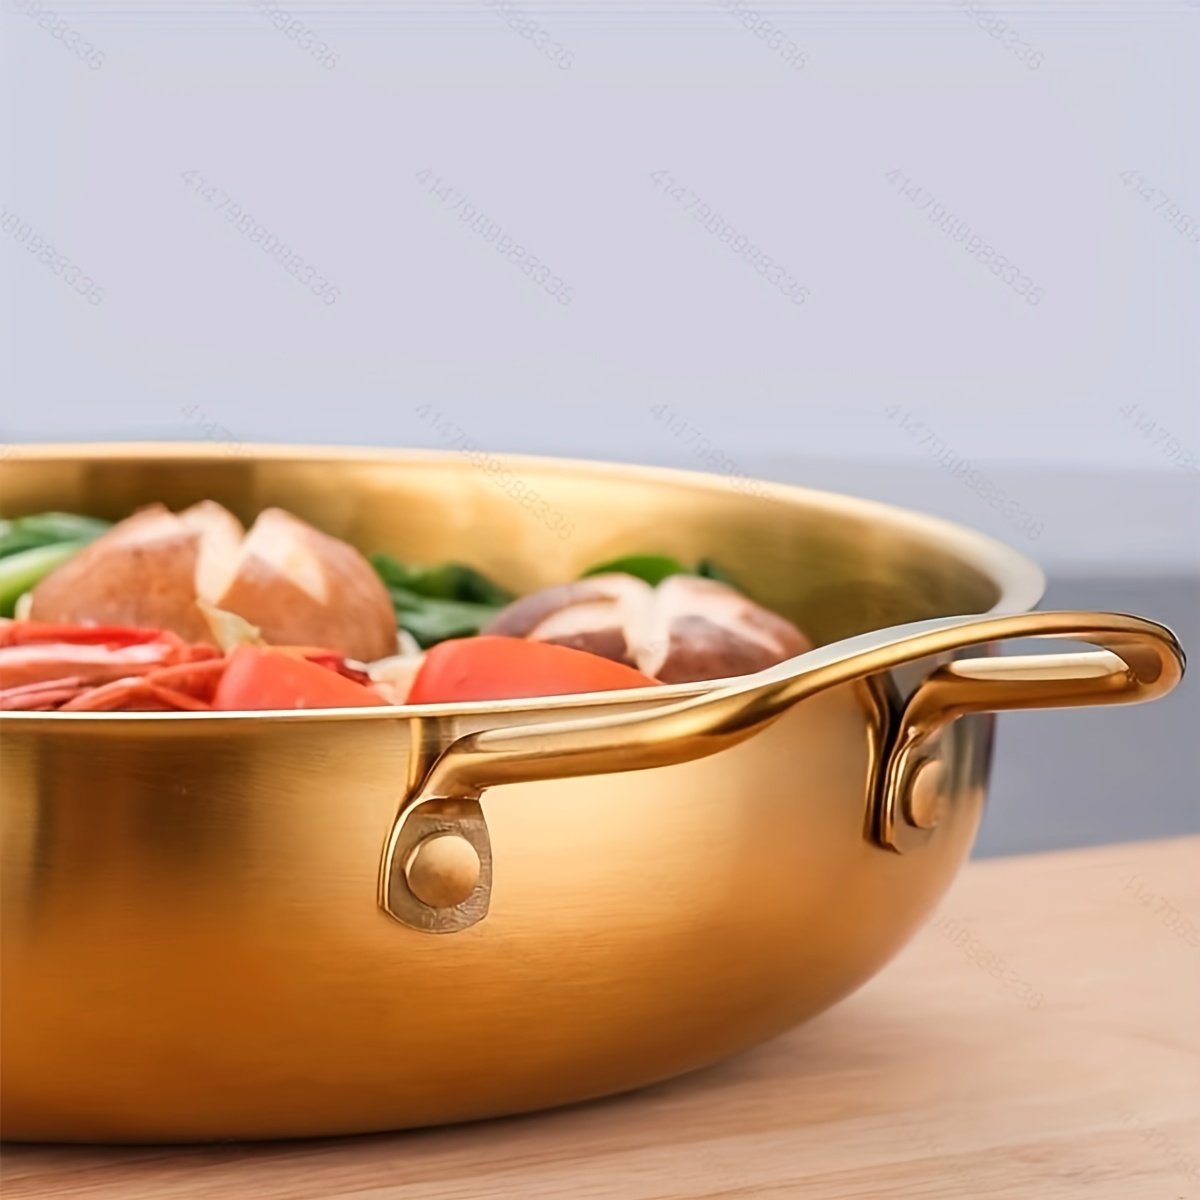 Korean Stainless Steel Ramen Pot - 9.4 Cooking Pot With Handle For